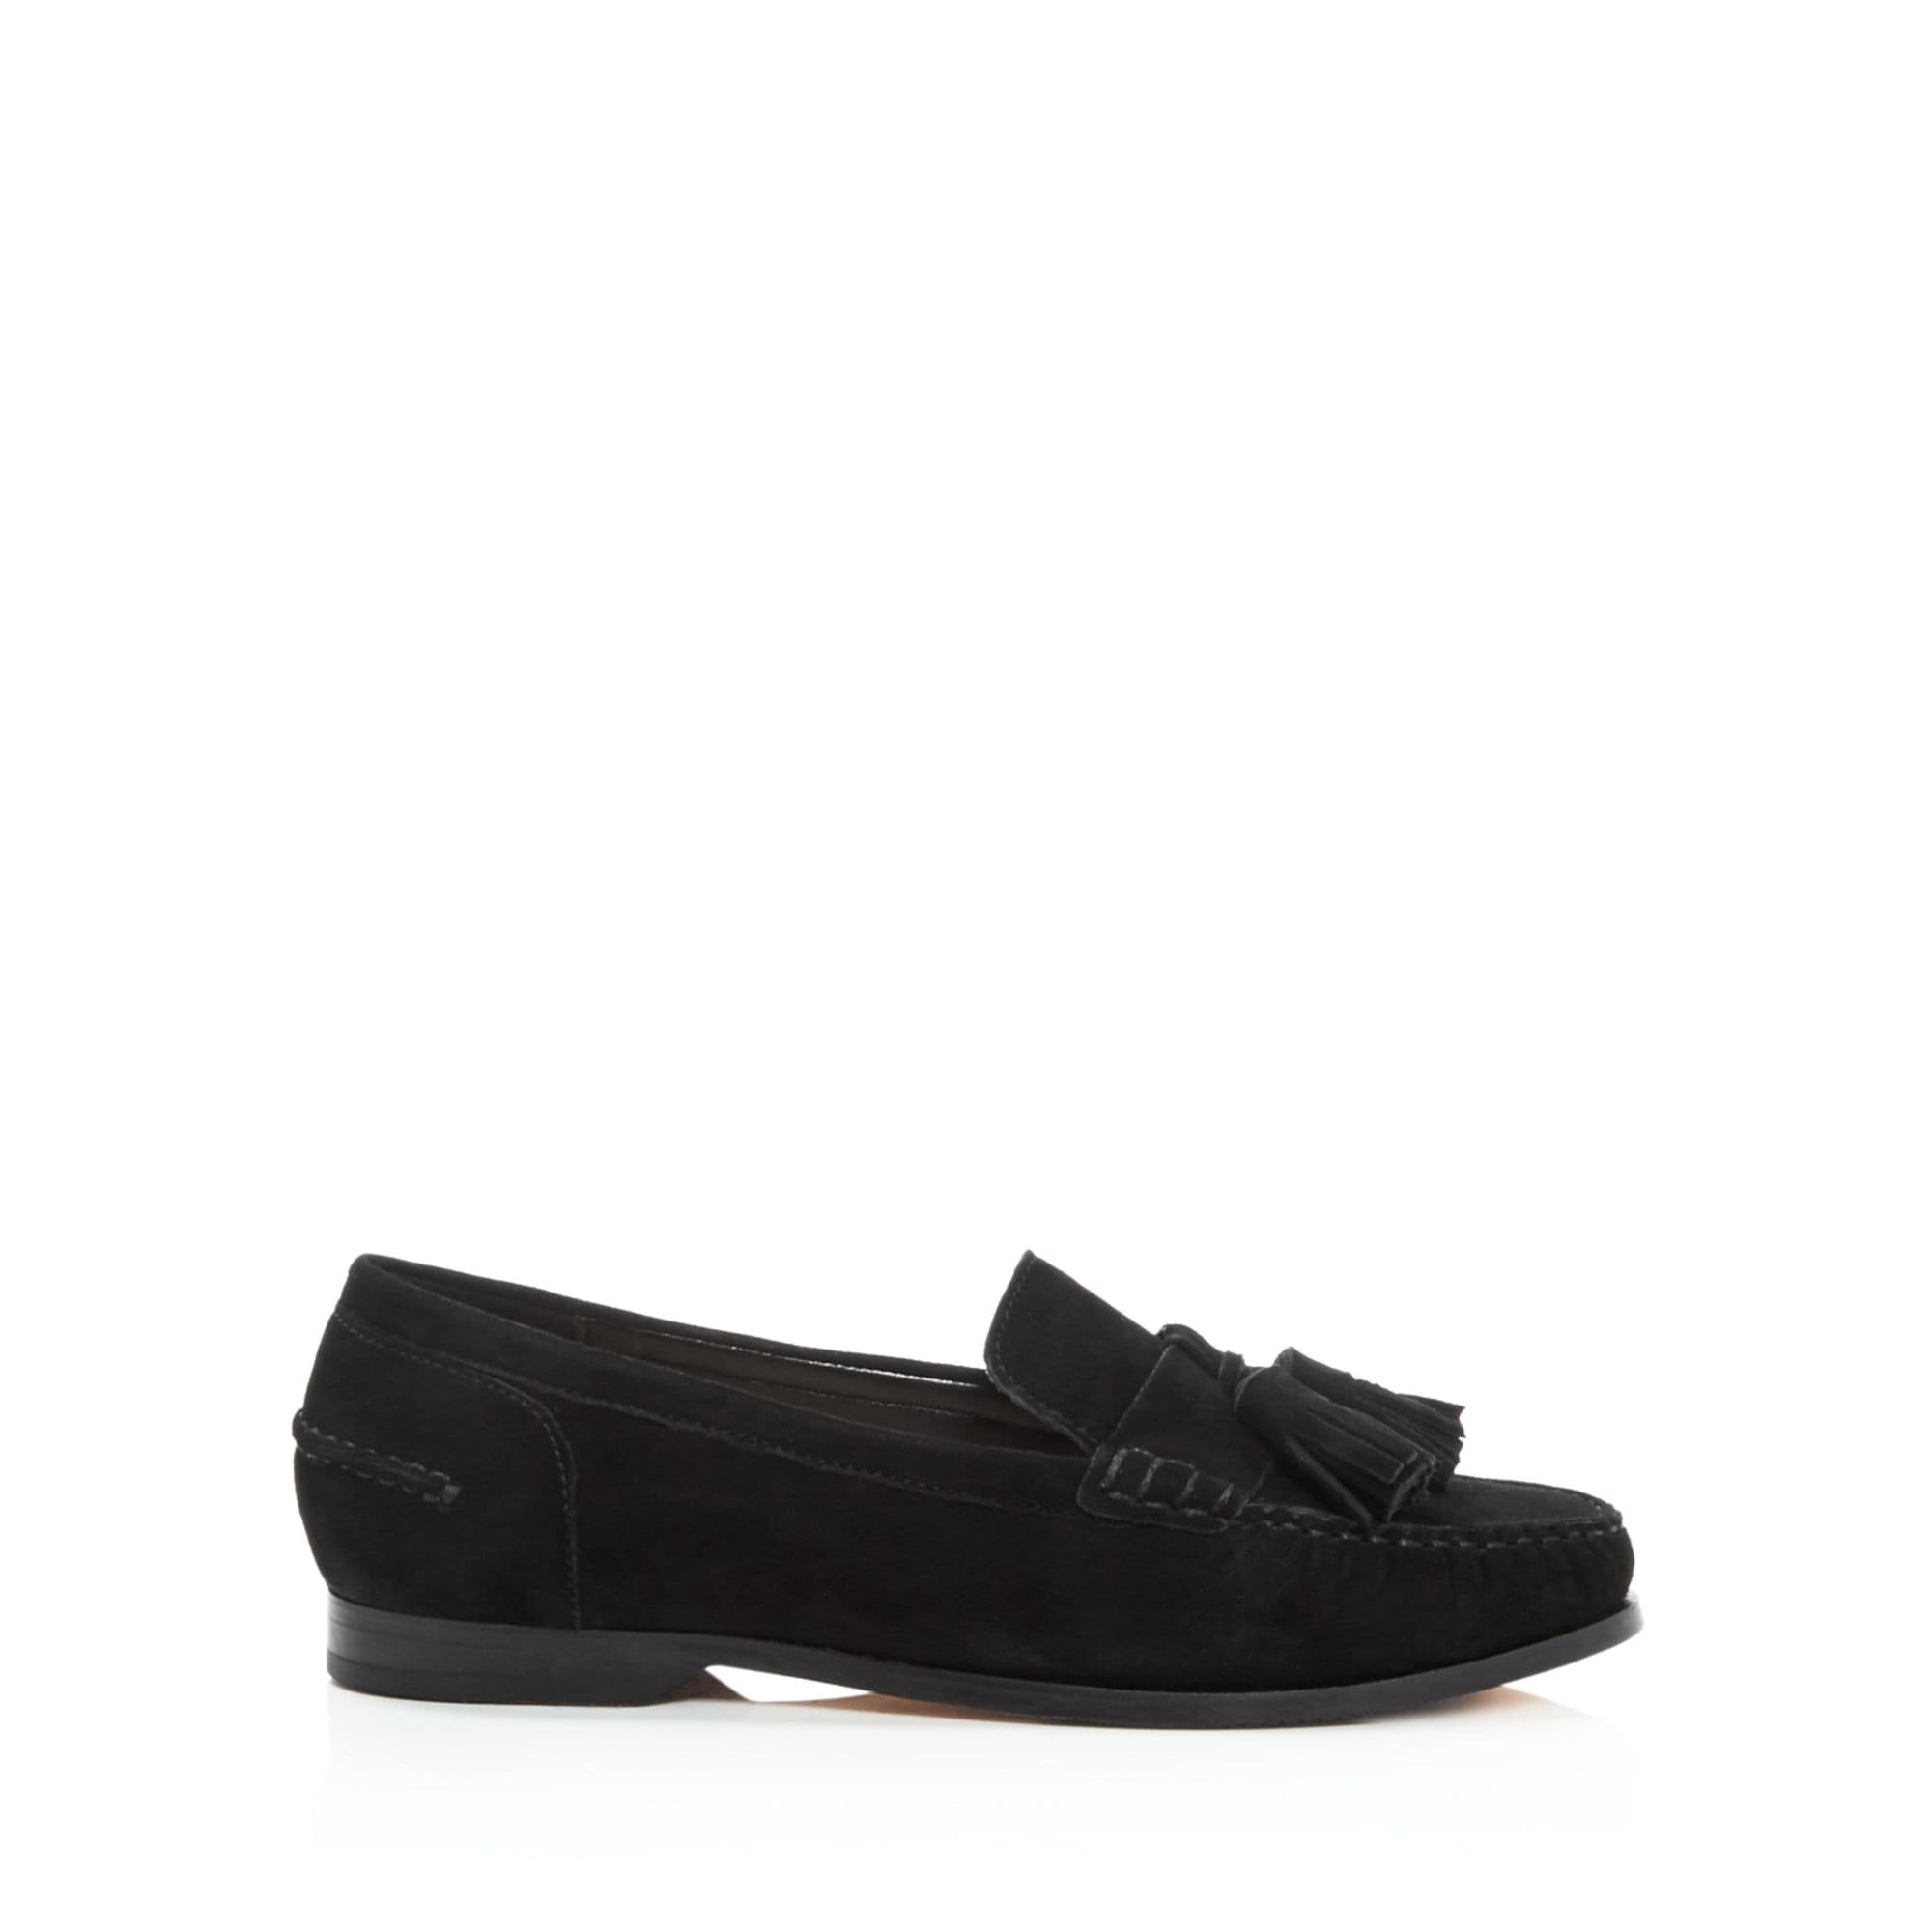 woocommerce-673321-2209615.cloudwaysapps.com-cole-haan-womens-black-suede-pinch-tassel-loafers